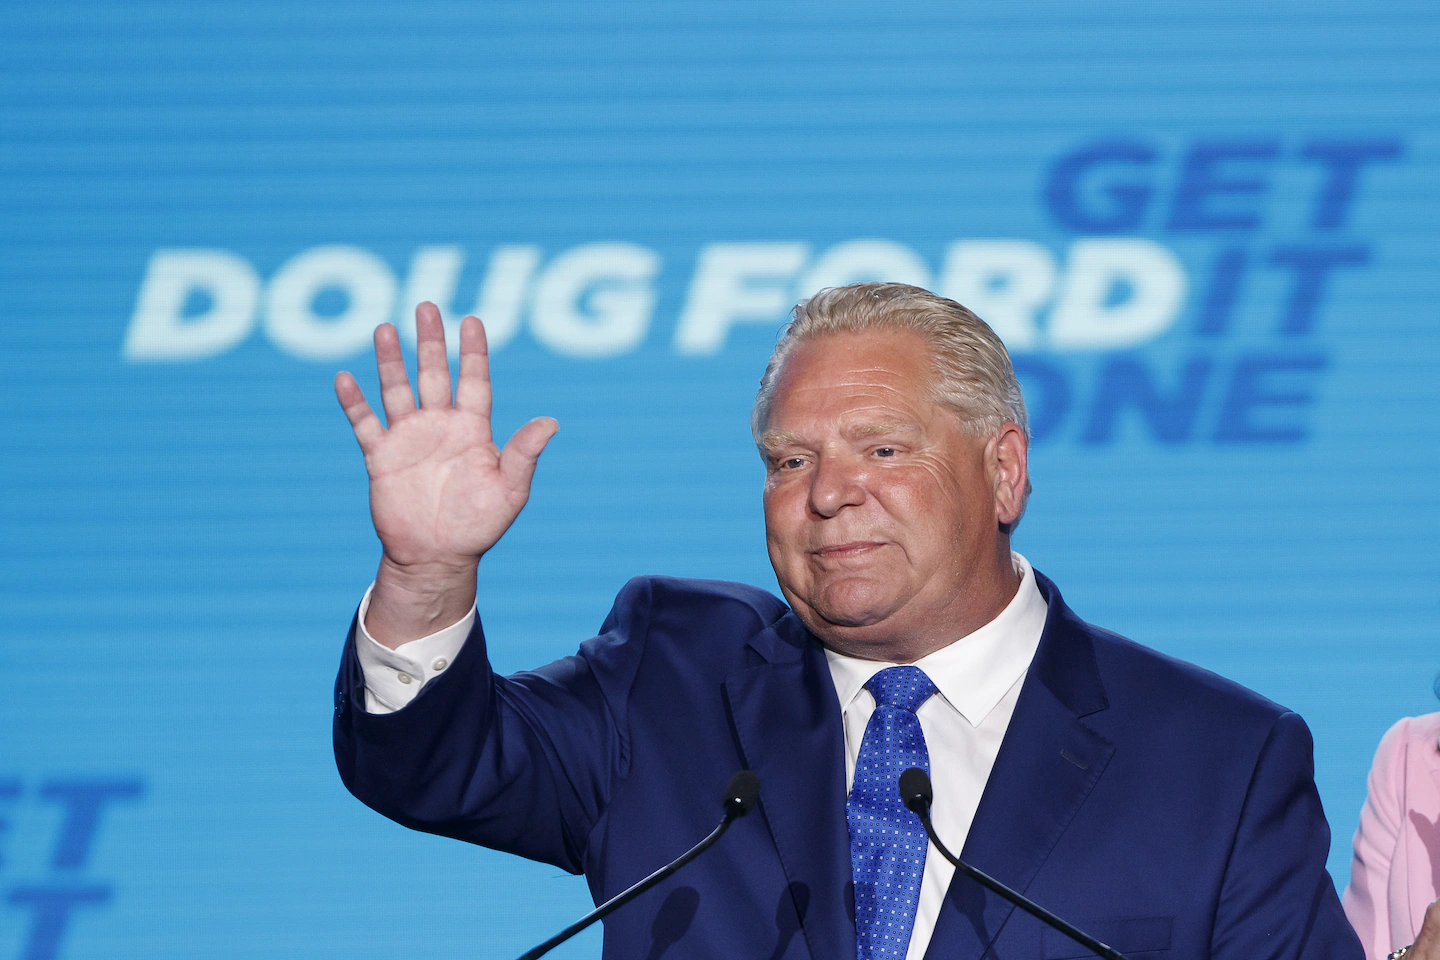 opinion |  Doug Ford’s win in Ontario should be a wake-up call against inaction